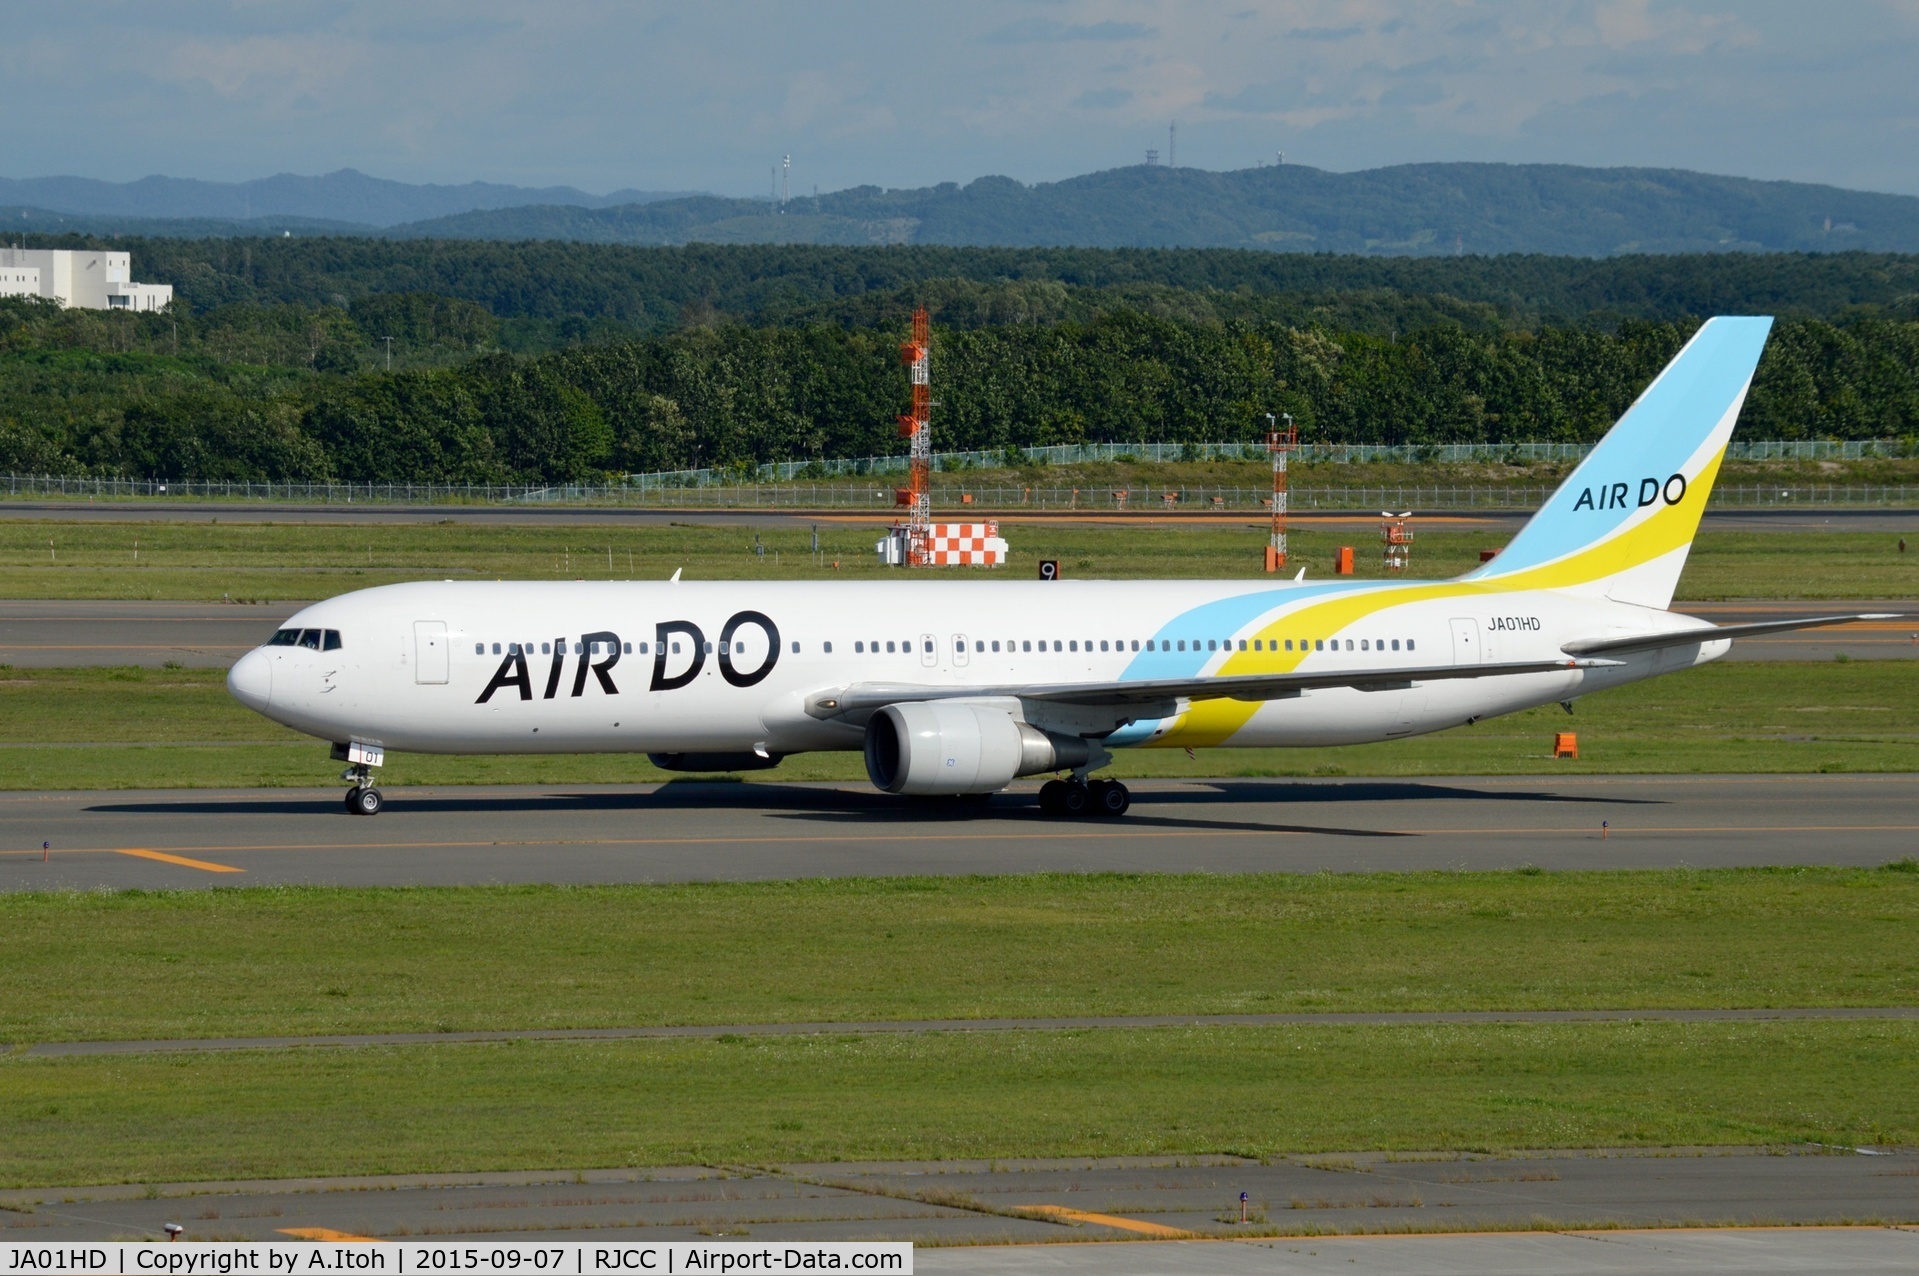 JA01HD, 1998 Boeing 767-33A/ER C/N 28159, at the taxiway